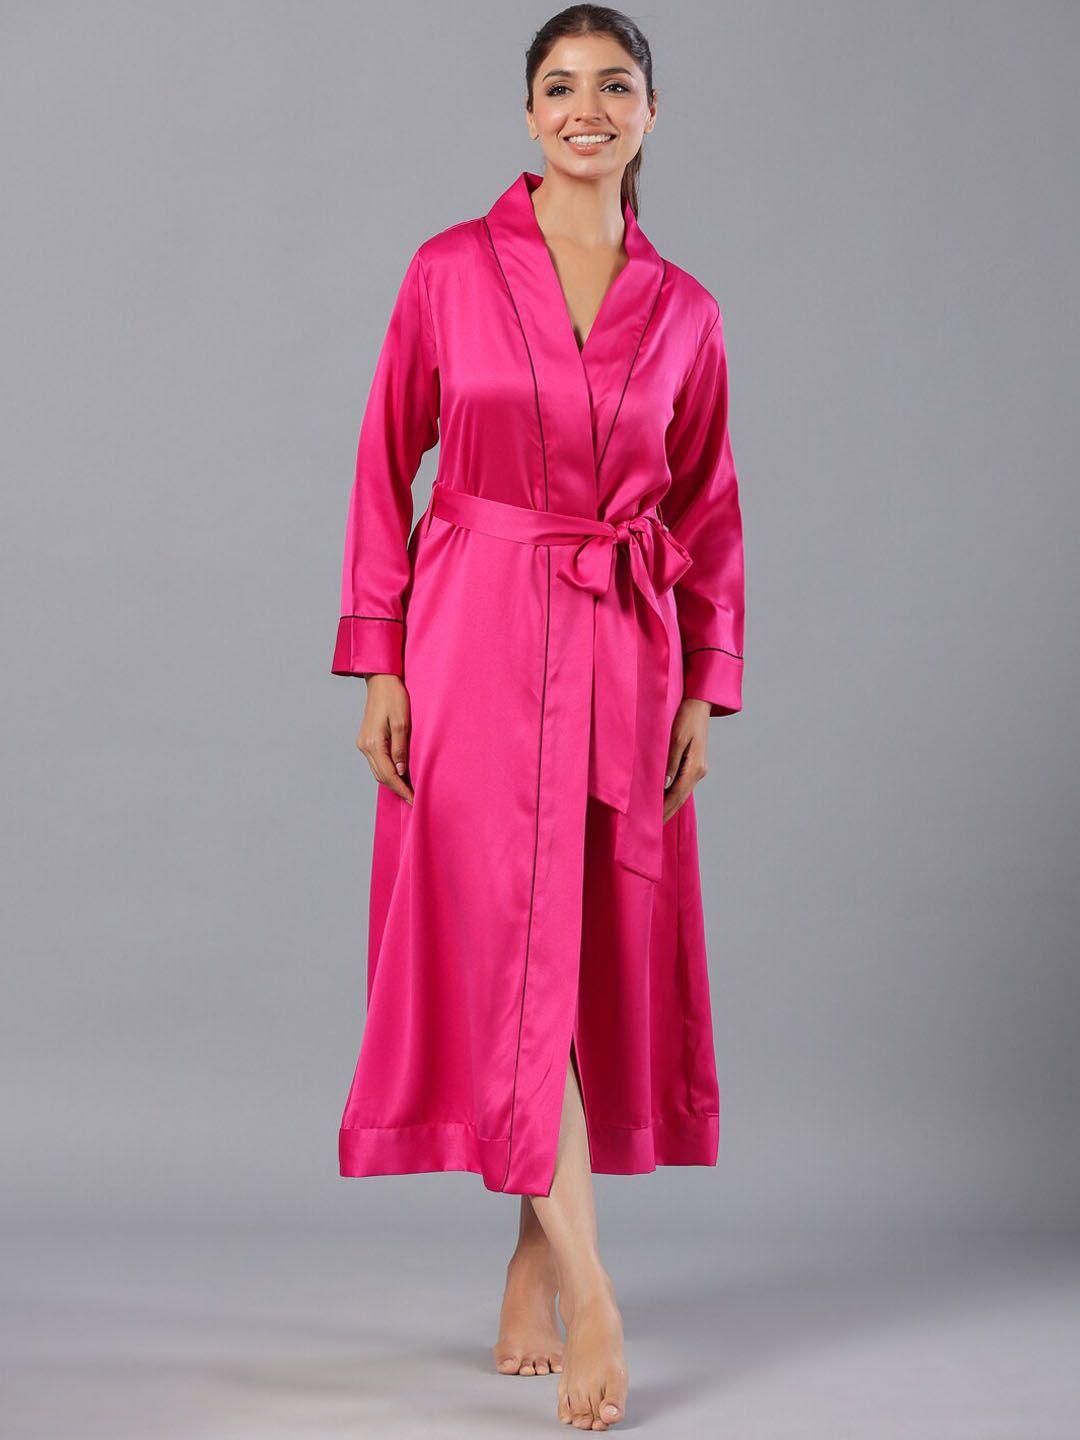 etc v-neck robe comes with fabric belt